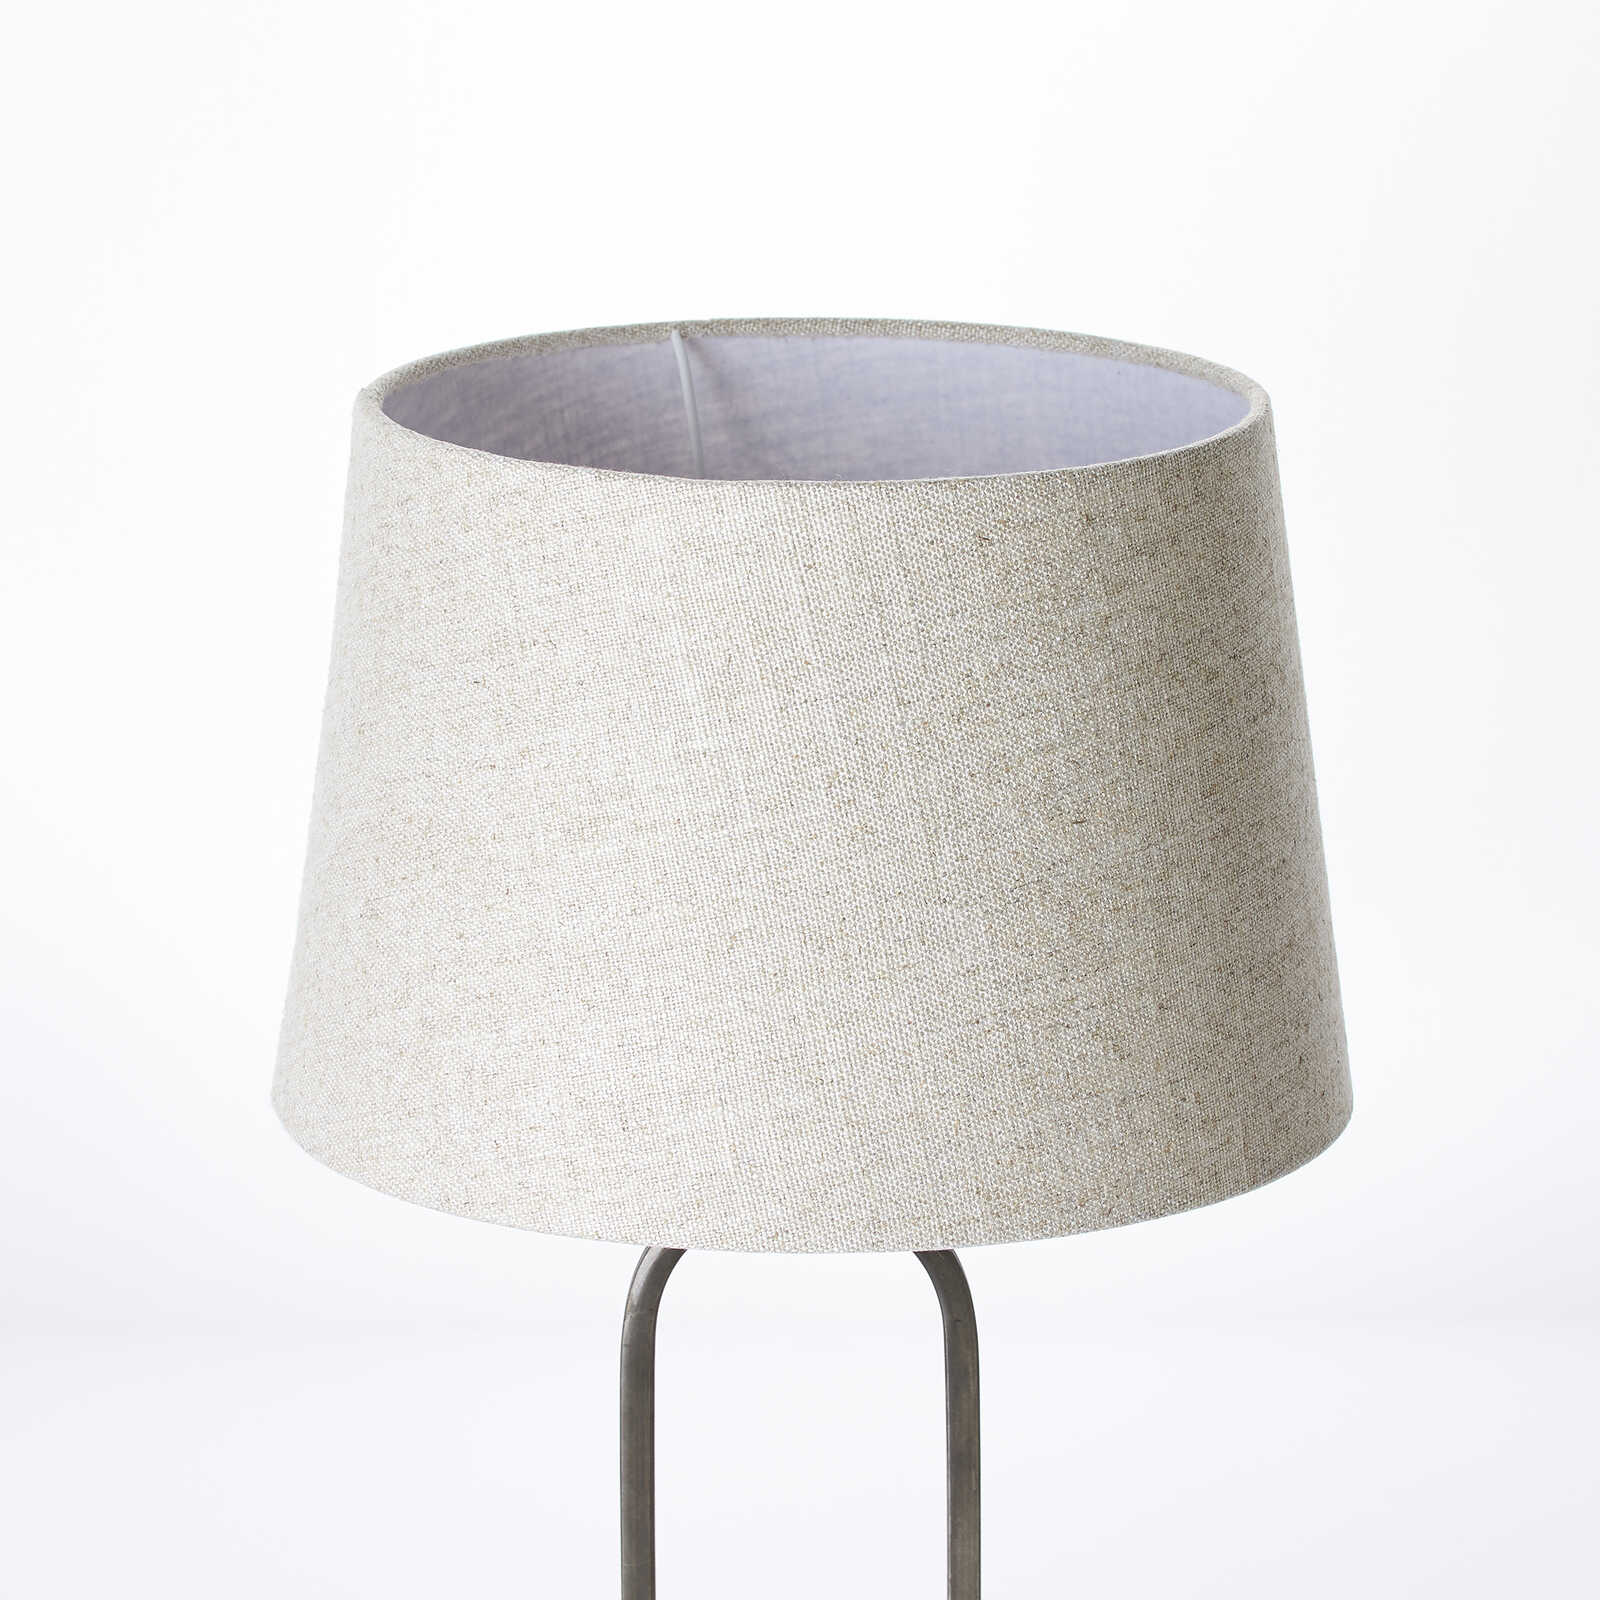             Textile table lamp - Ole 2 - Brown
        